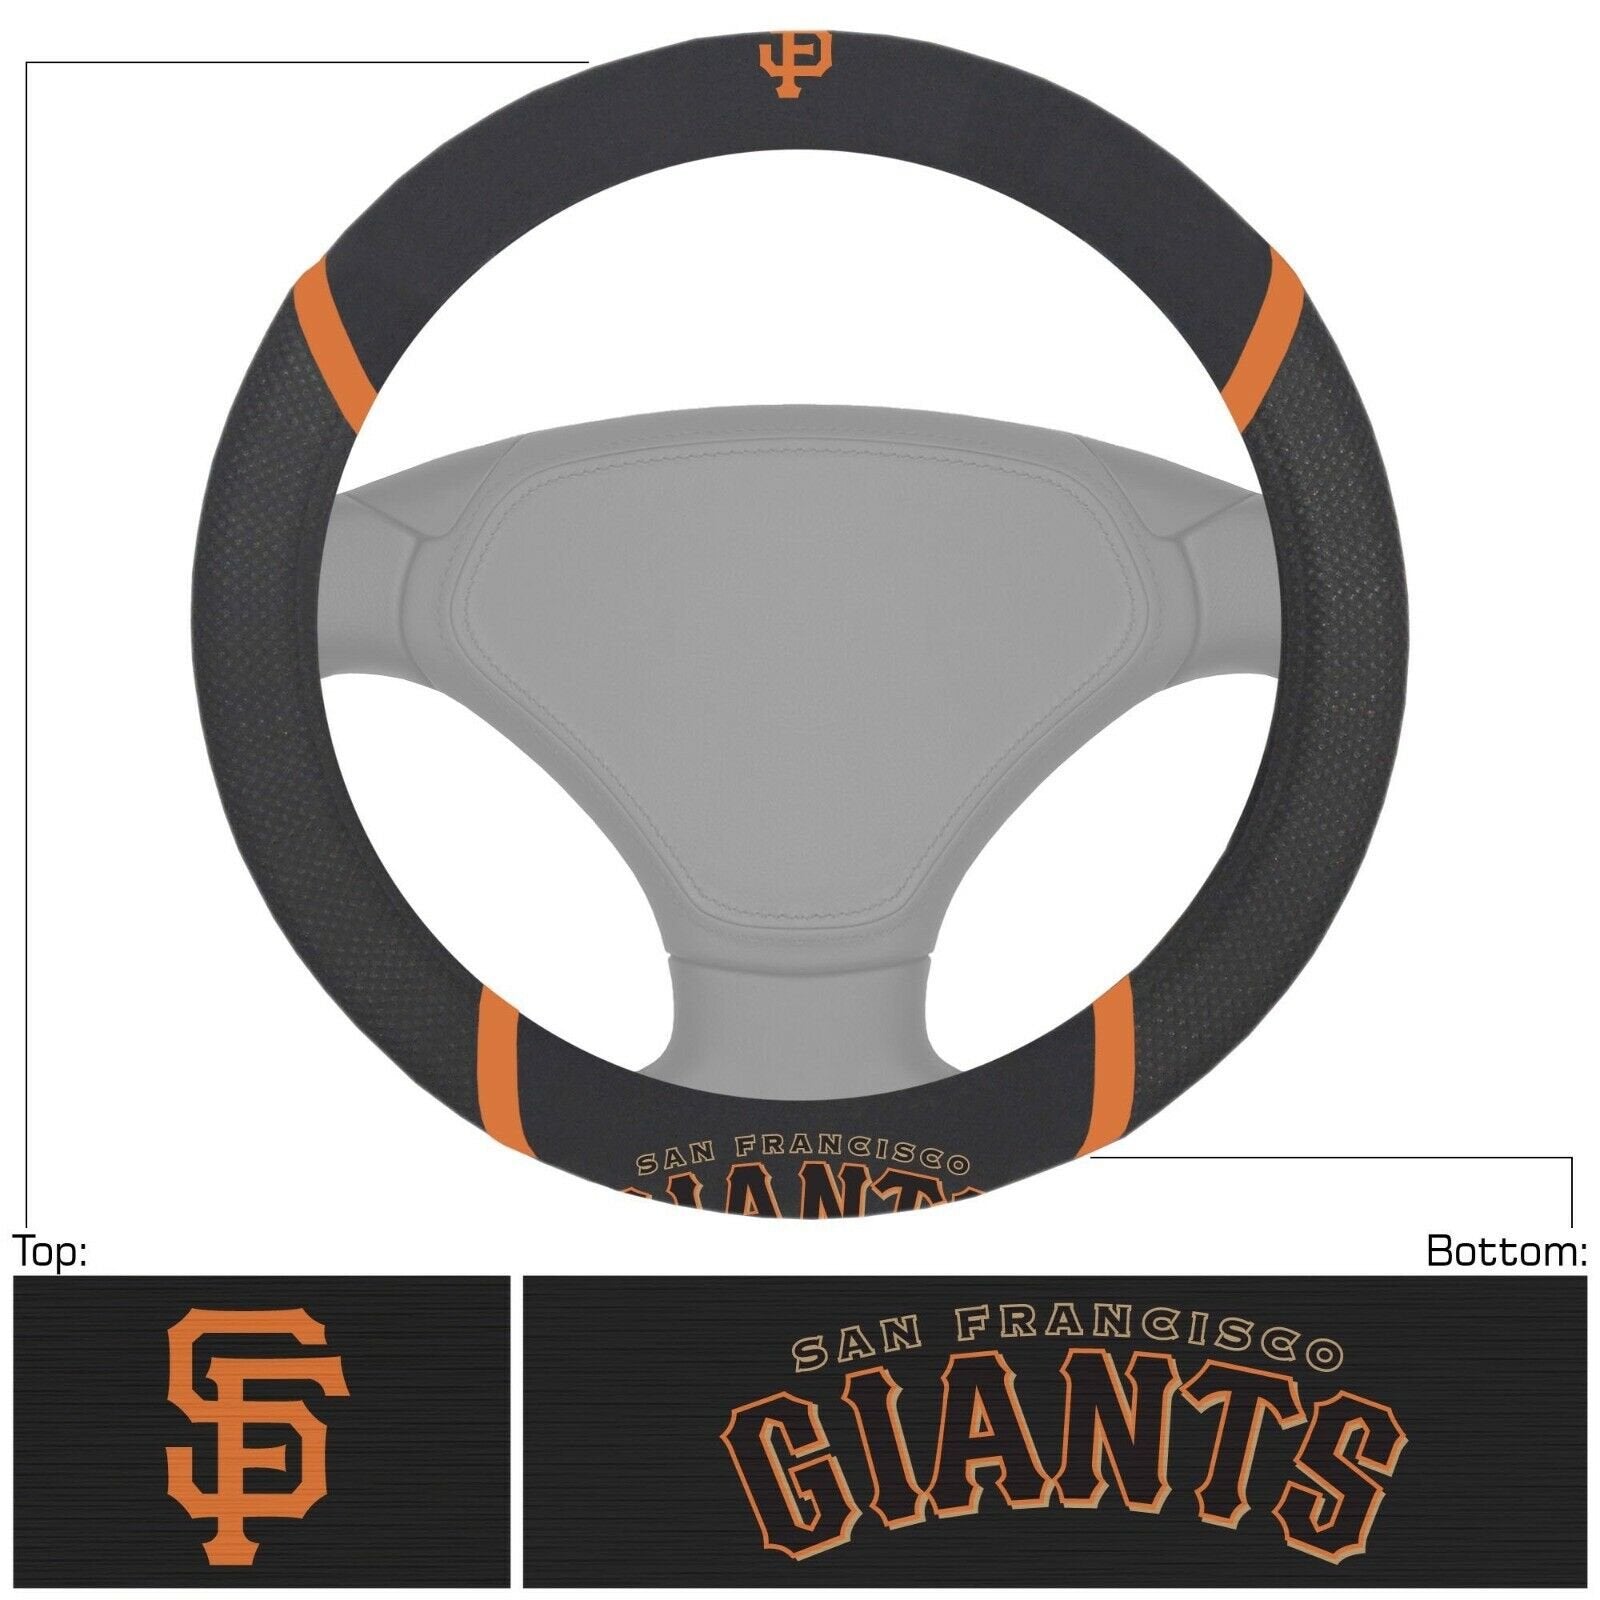 San Francisco Giants Steering Wheel Cover Premium Embroidered Black 15 Inch